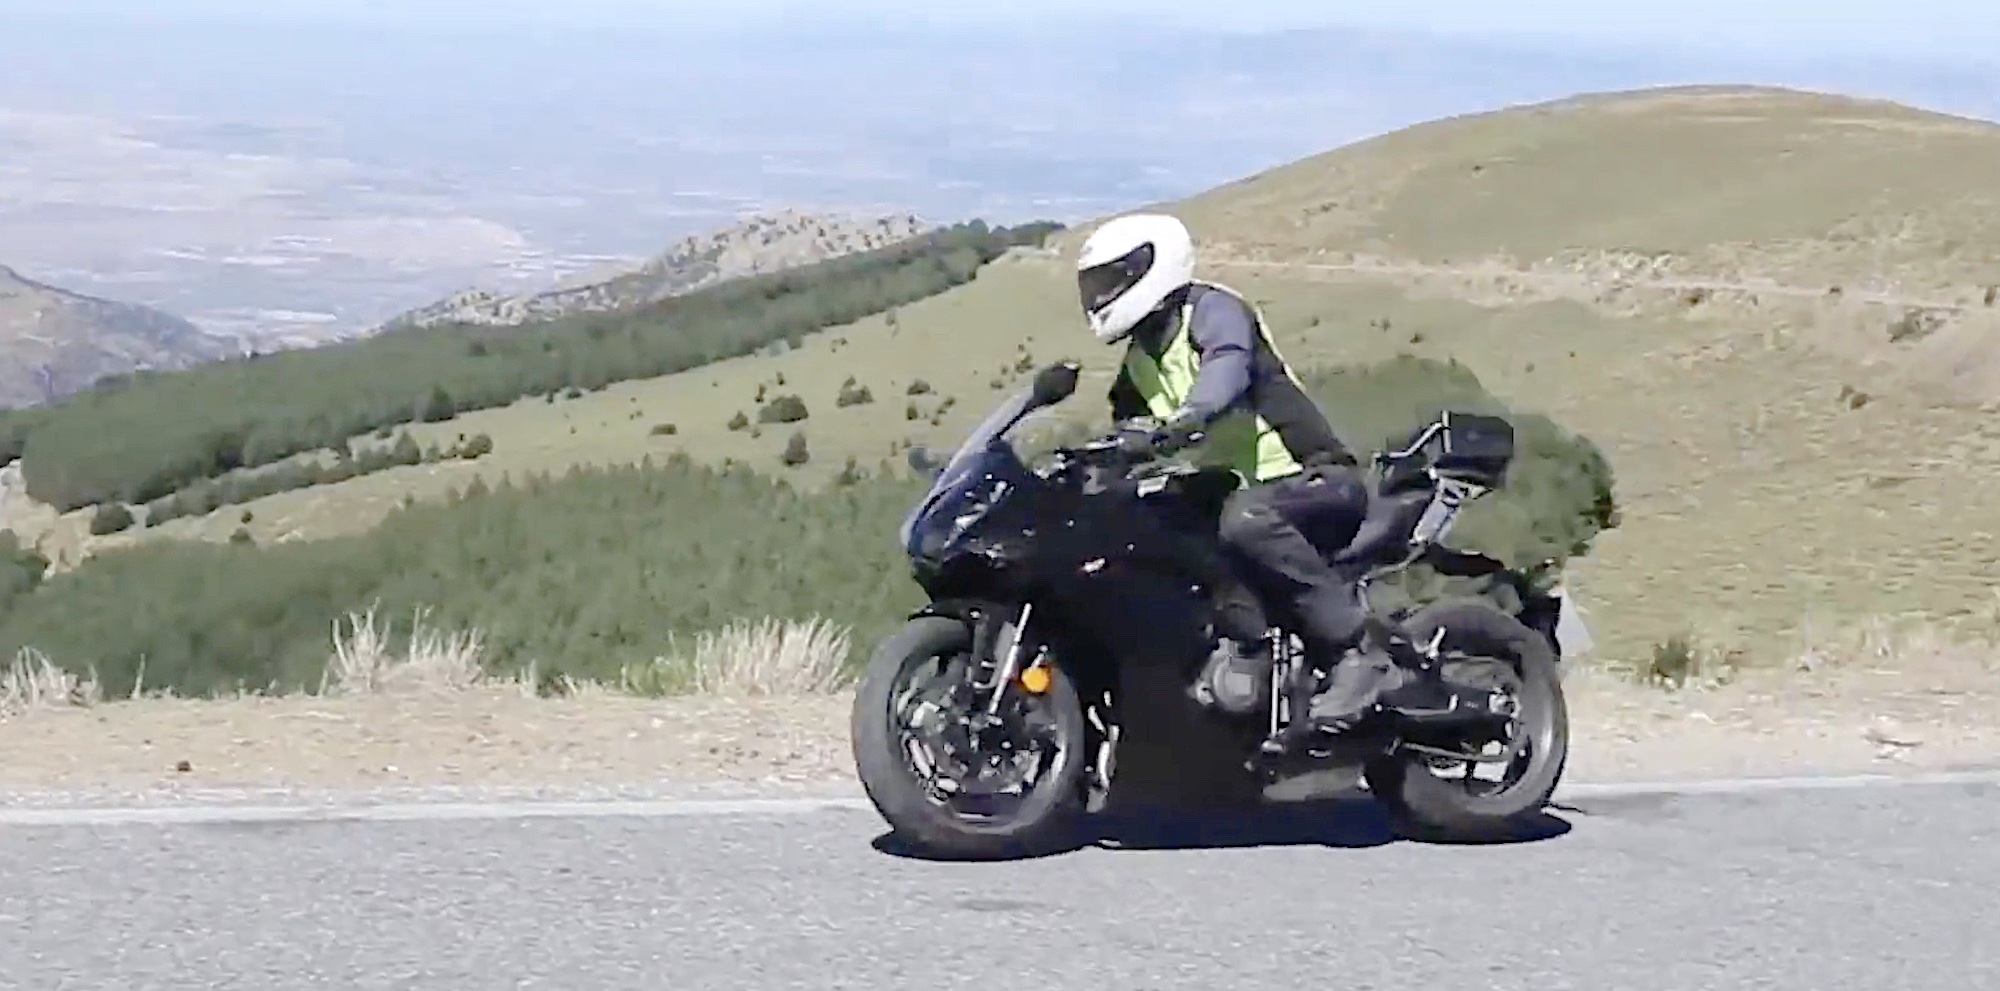 A view of a tester from Triumph trying out what we think is the anticipated Daytona 660. Media sourced from RideApart's video coverage.